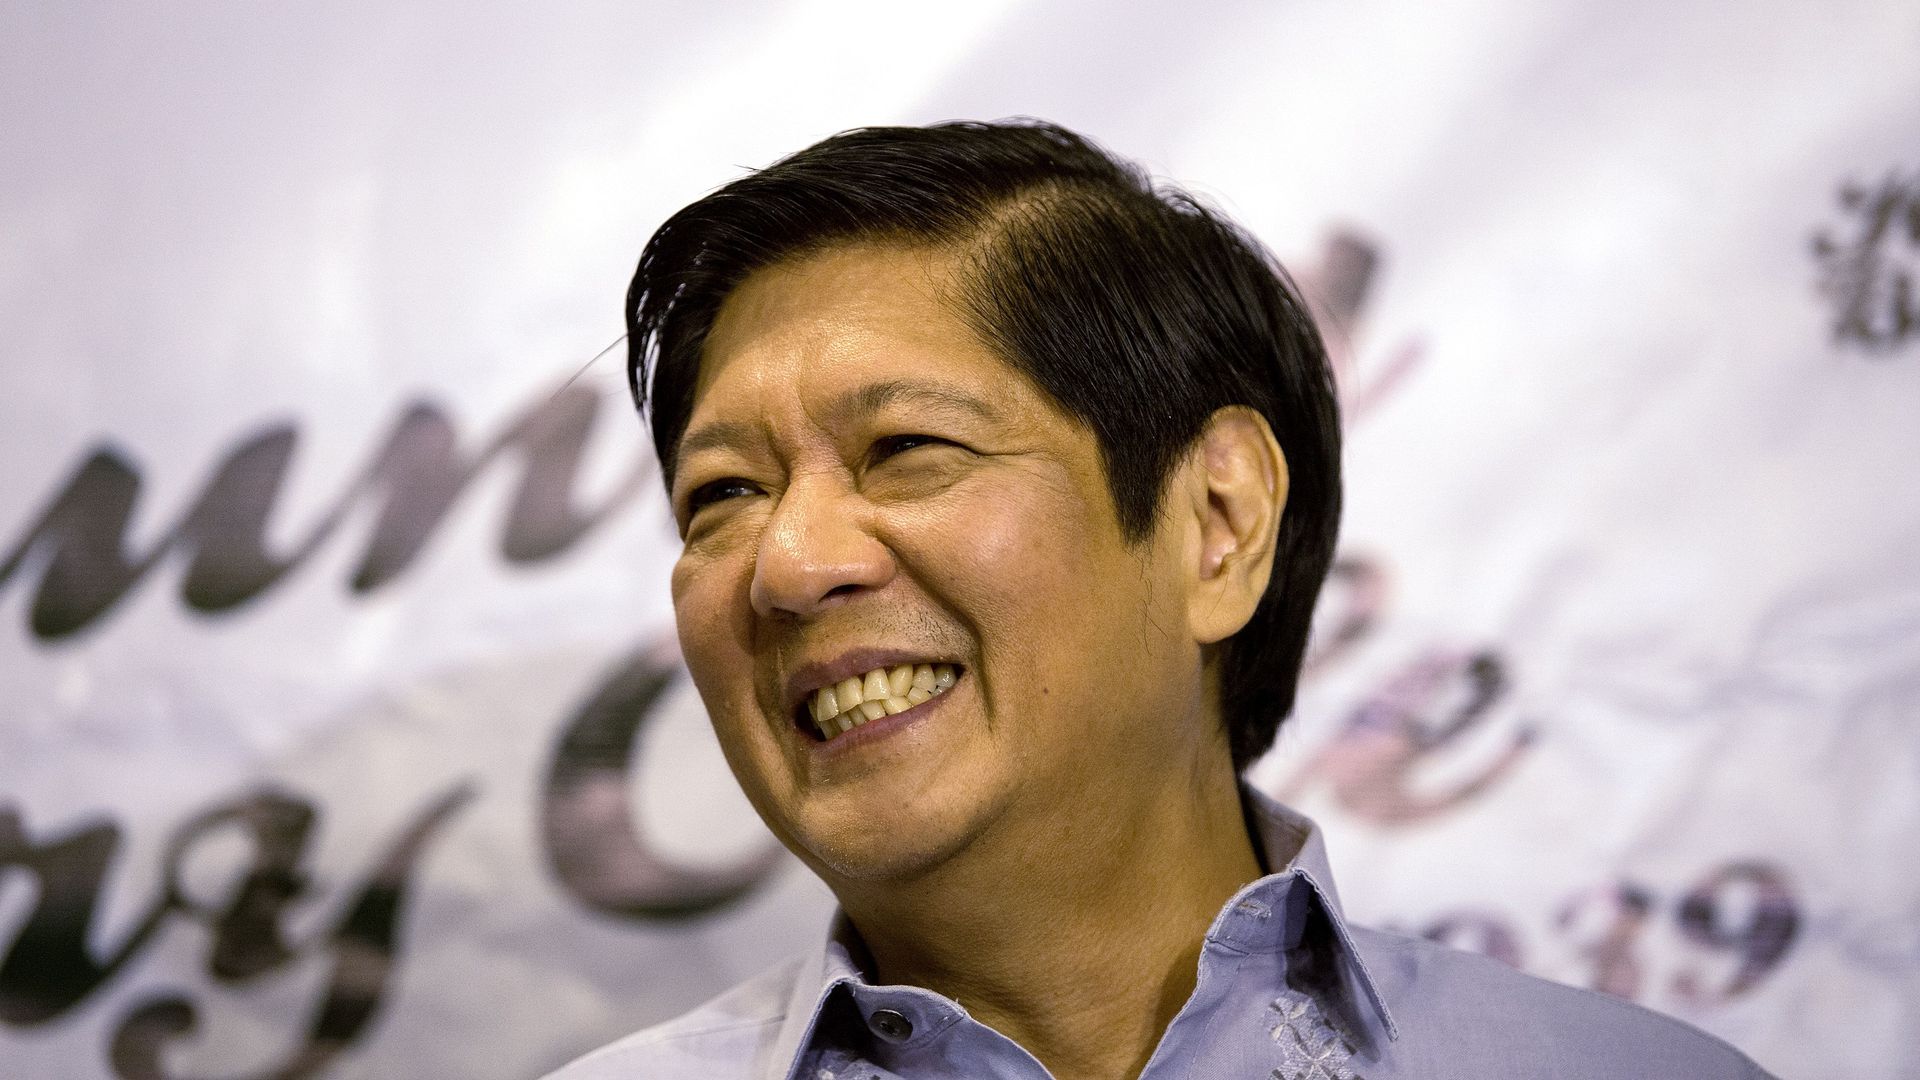 Headshot of man smiling and looking beyond the camera. Campaign canvas in the background. 